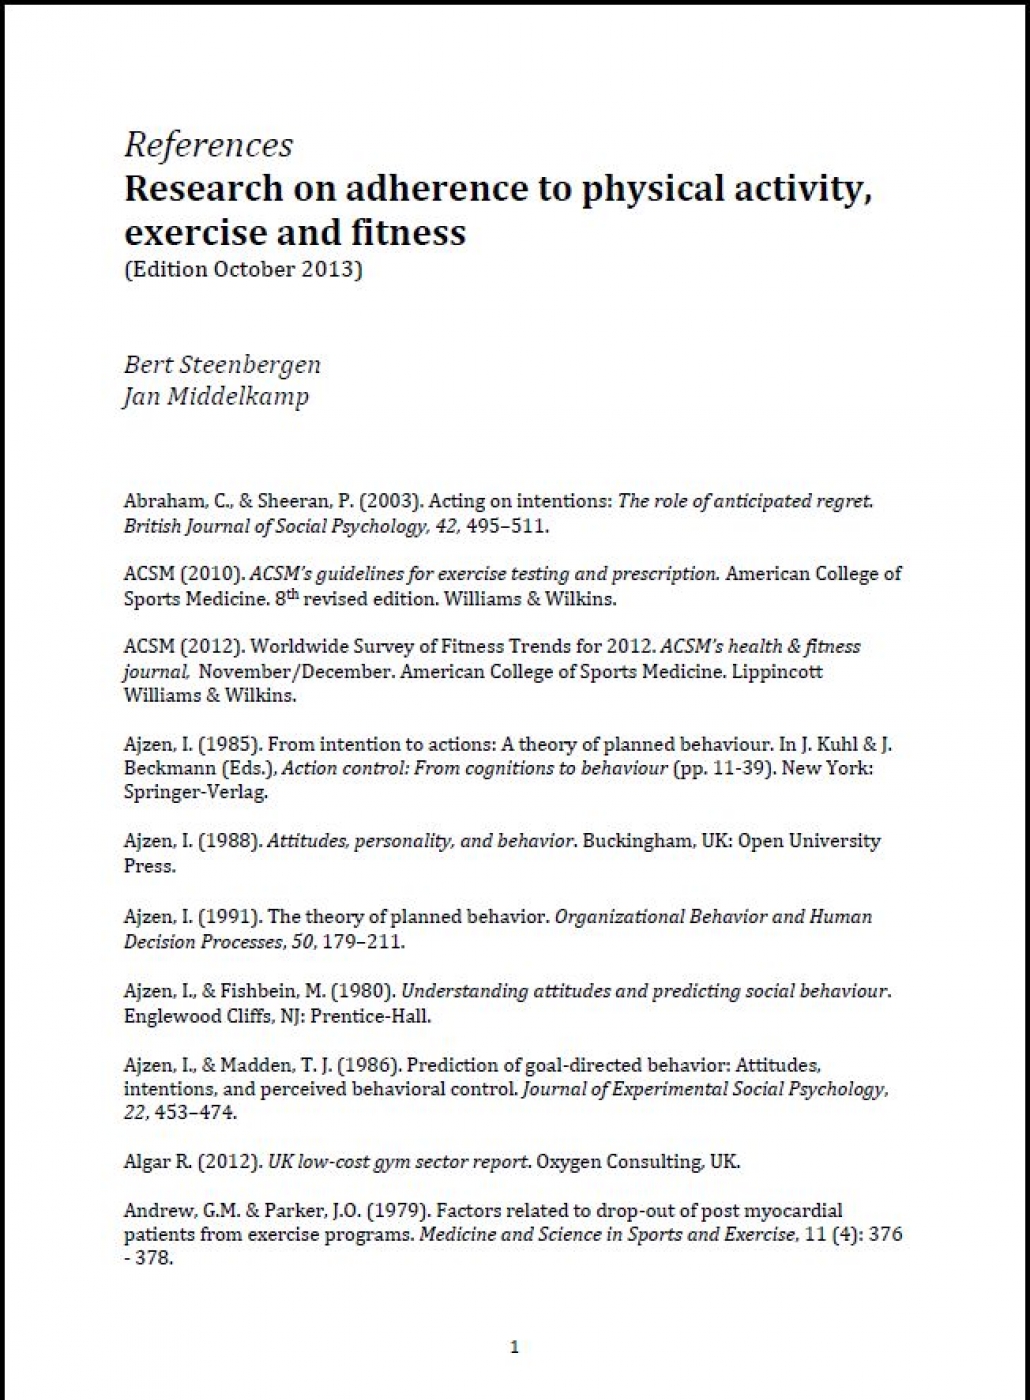 References of research on adherence to physical activity, exercise and fitness